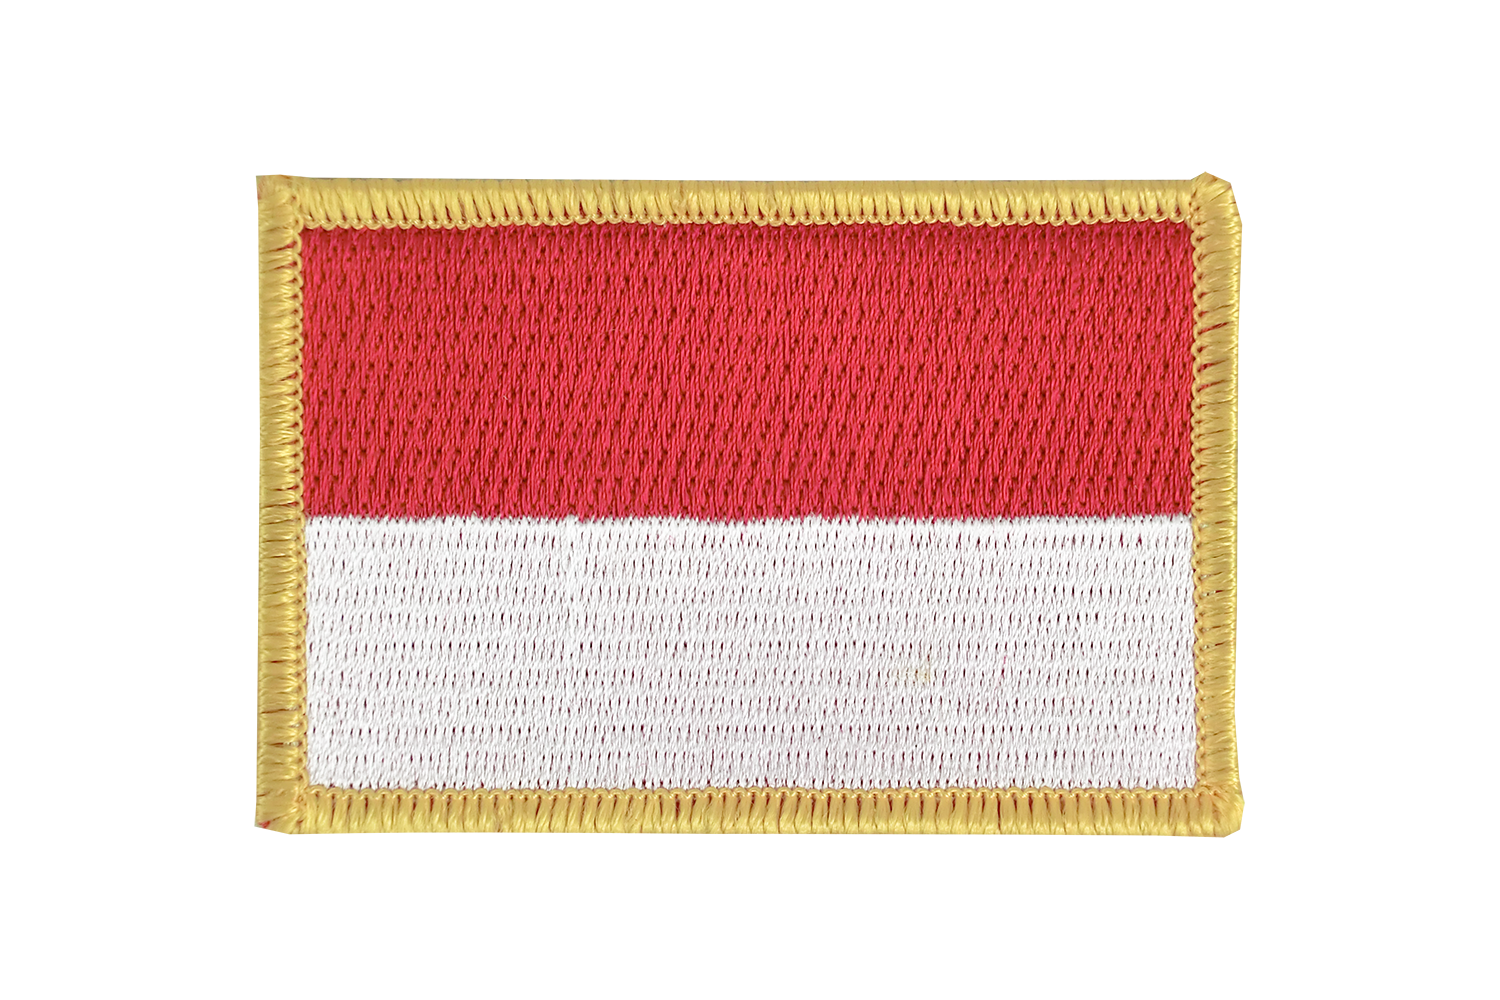 BALI INDONESIA FLAG PATCH EMBROIDERED new DENPASAR w/ VELCRO® Brand Fastener